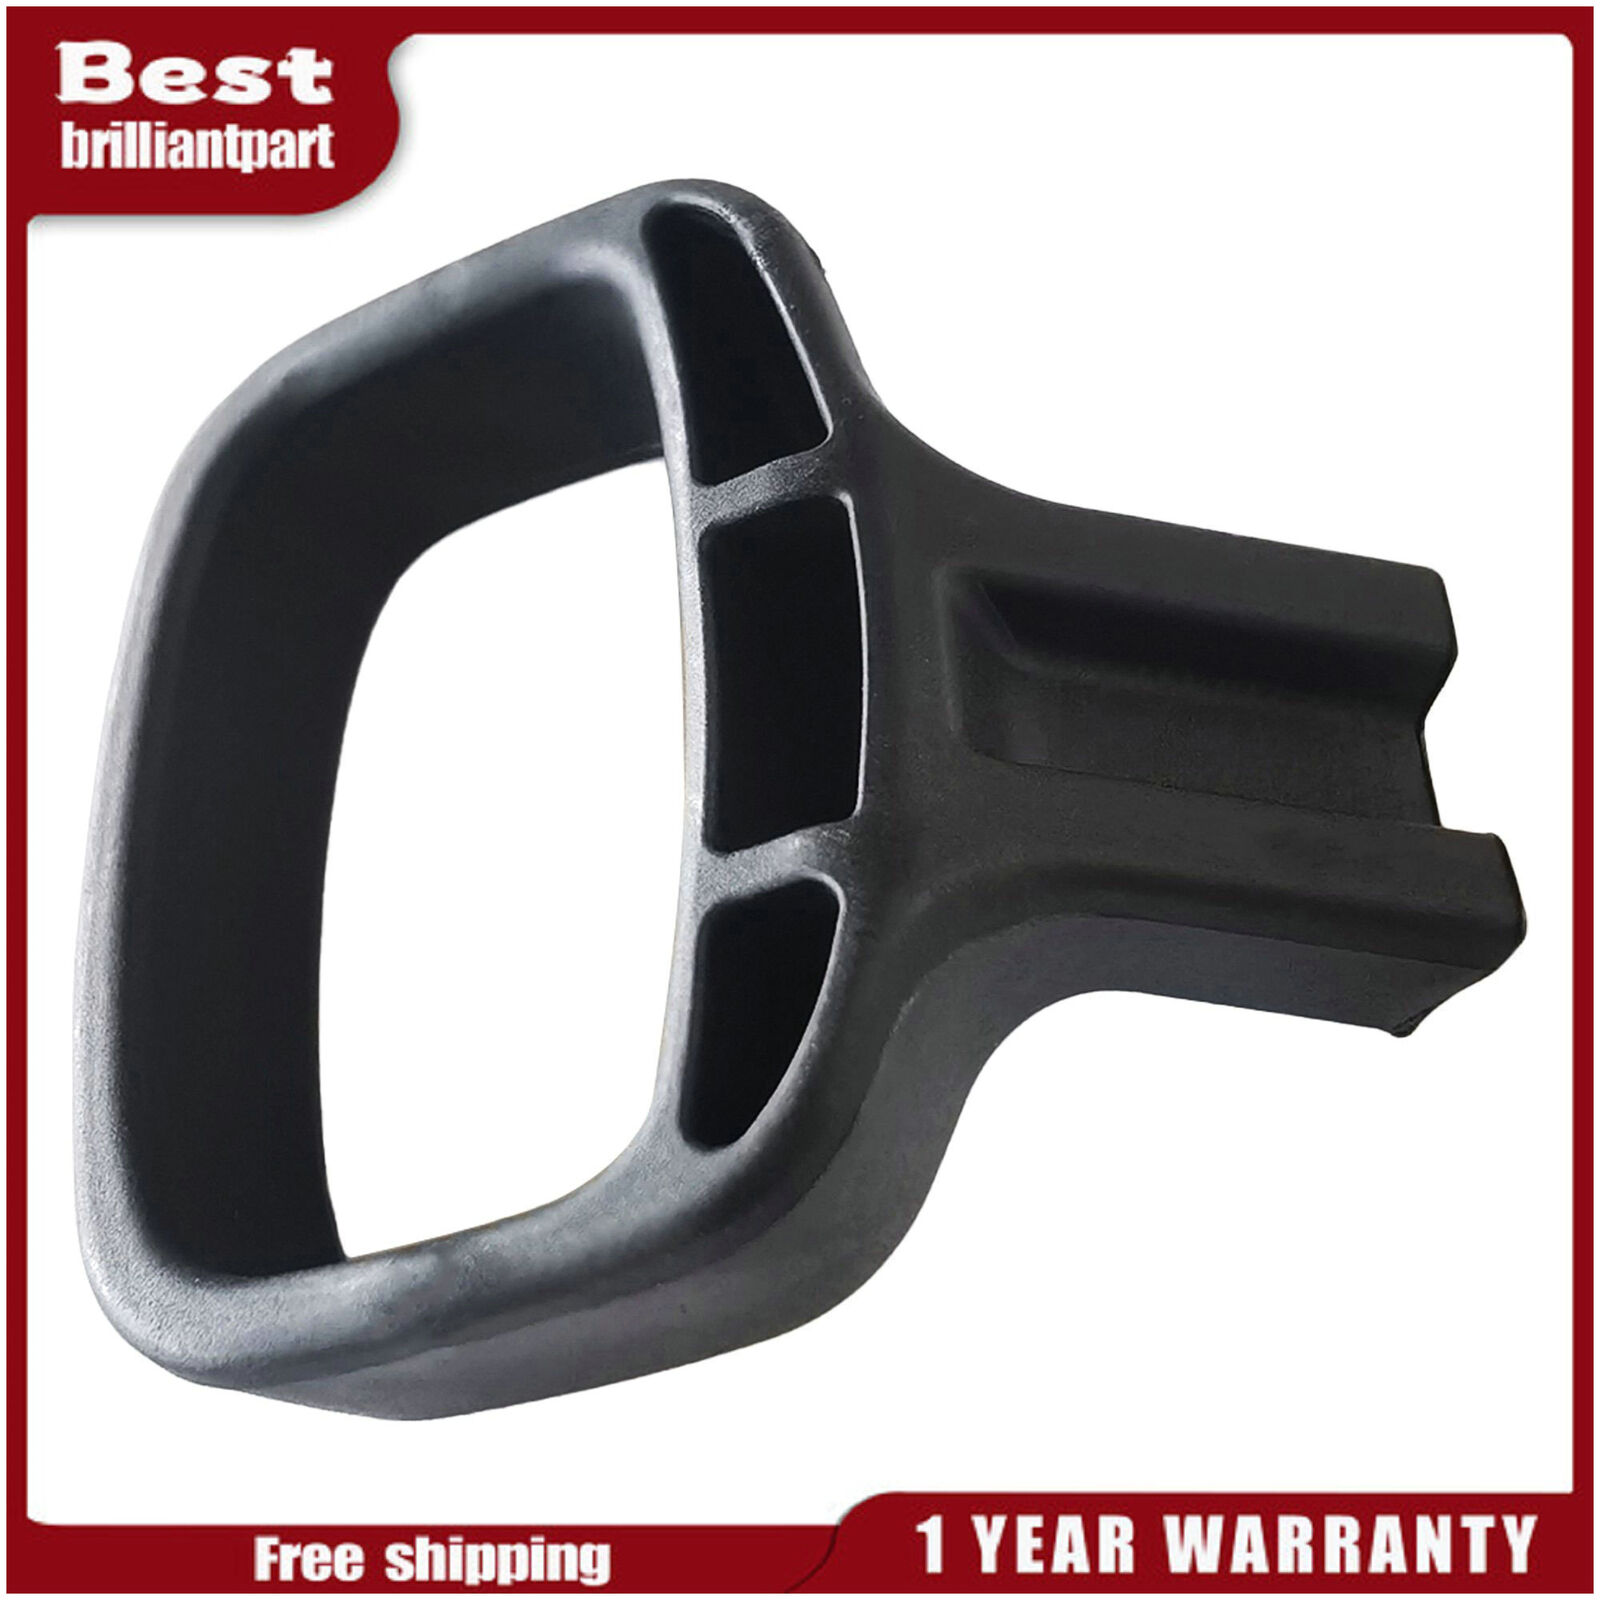 Seat Adjustment Handle For 2003-19 Audi A1 A3 TT Volkswagen Golf Polo Caddy